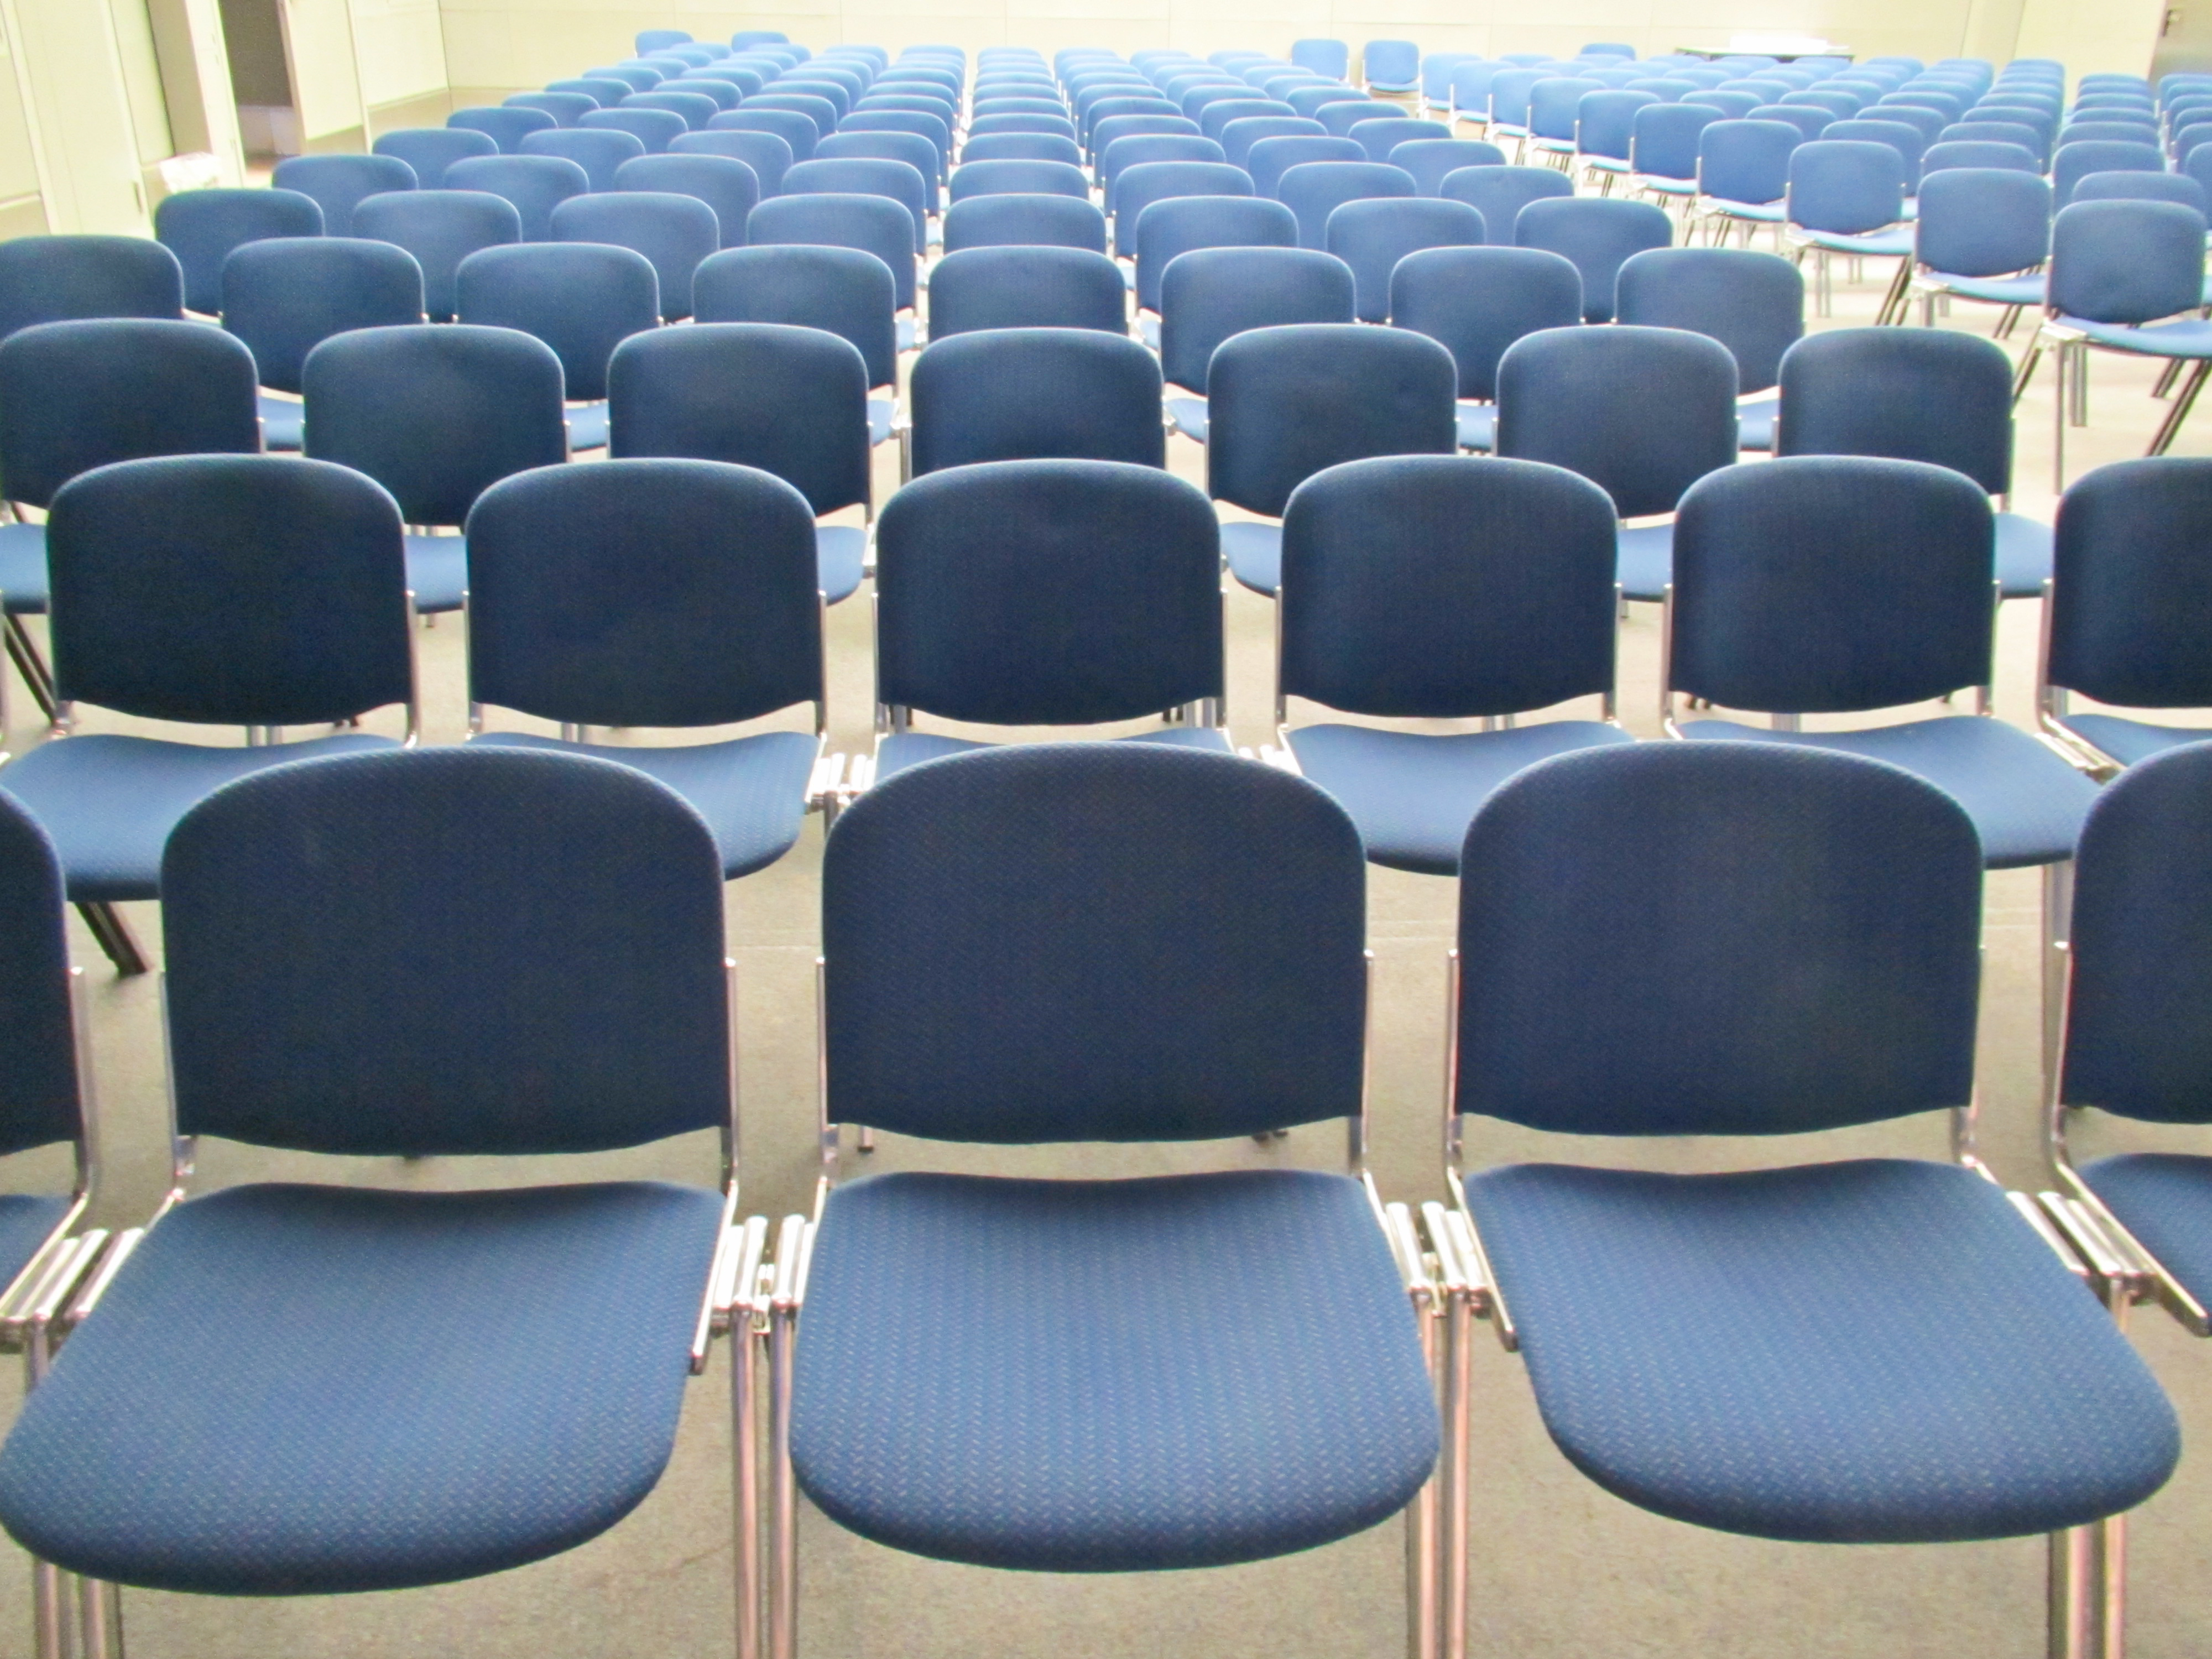 Tips to Increase Attendance at Your Next Meeting or Event